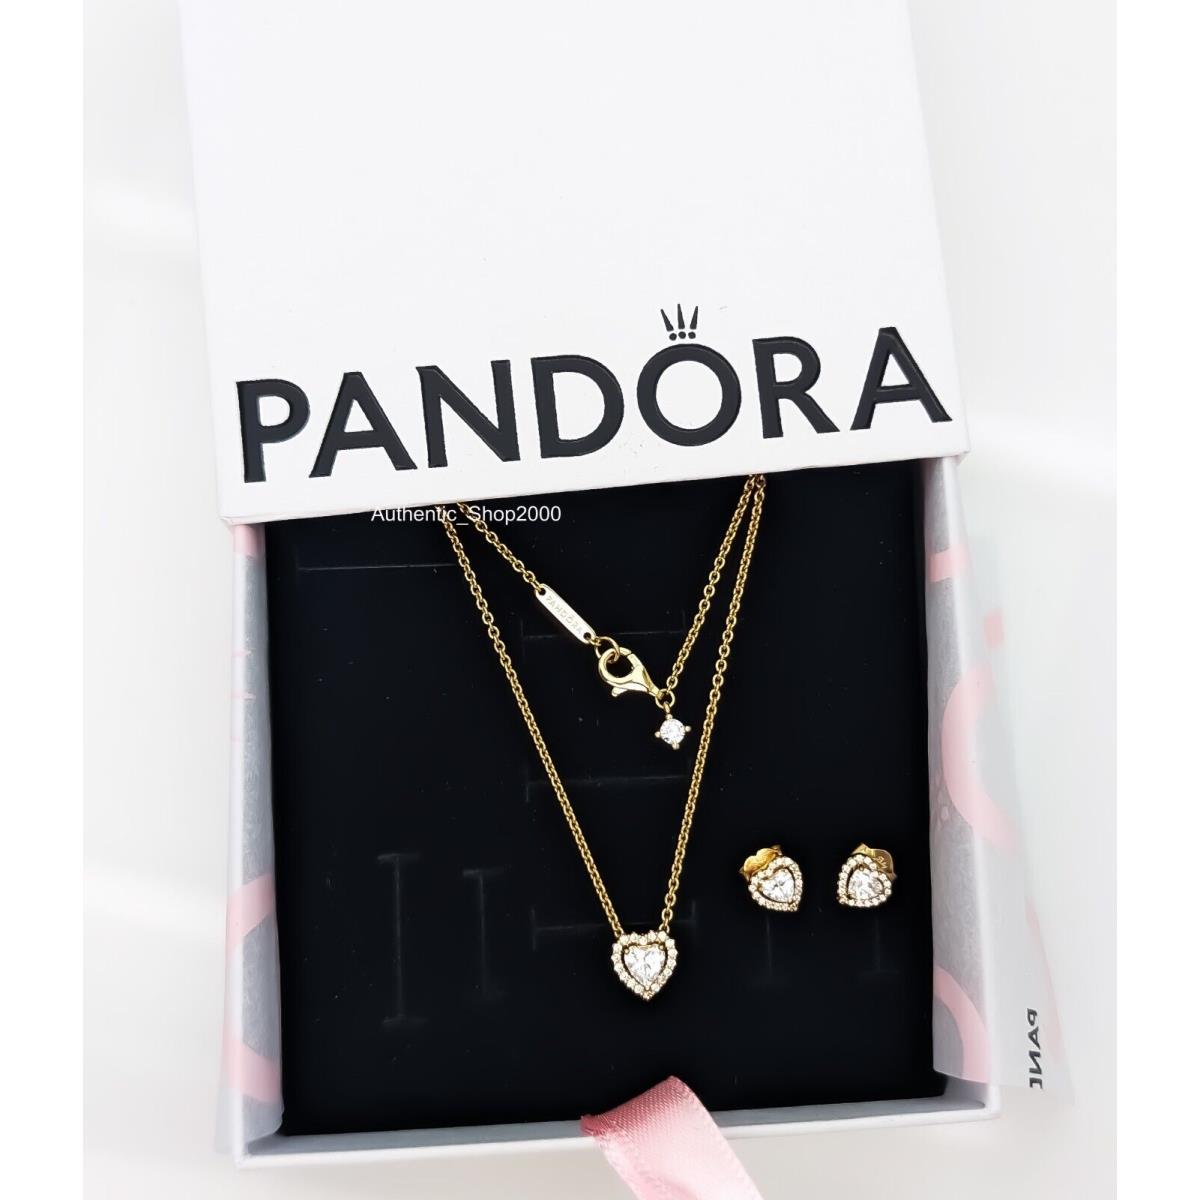 Pandora 14K Gold Sparkling Heart Jewelry Gift Set Necklace + Earrings